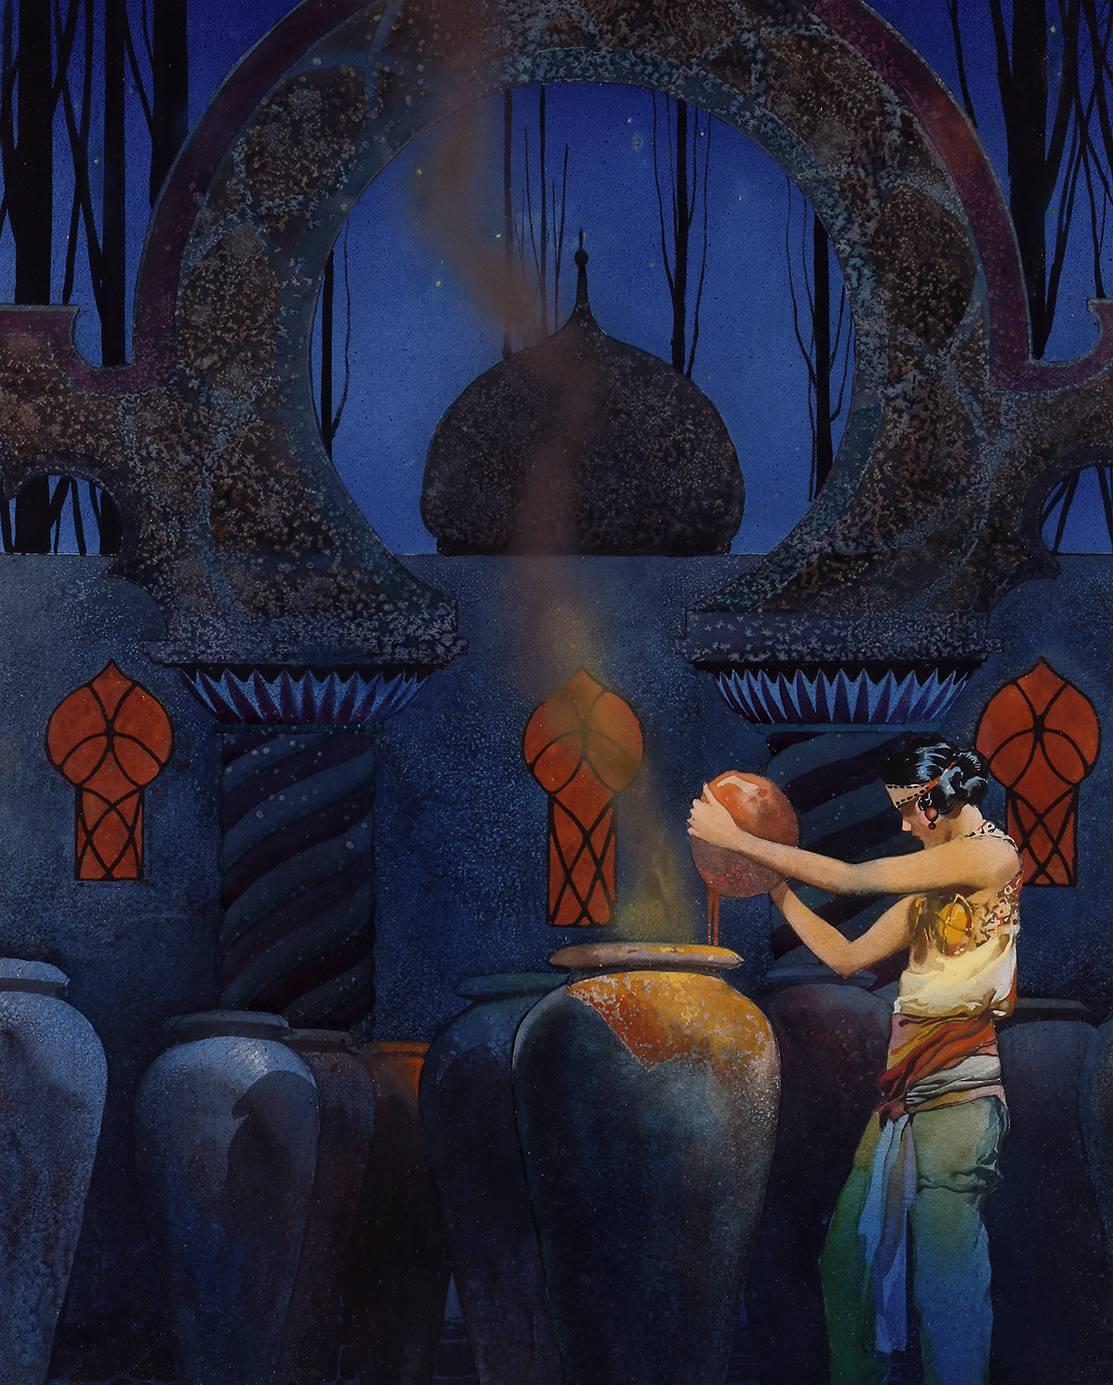 Ali Baba And The Forty Thieves - Art Deco Painting by Frank Godwin